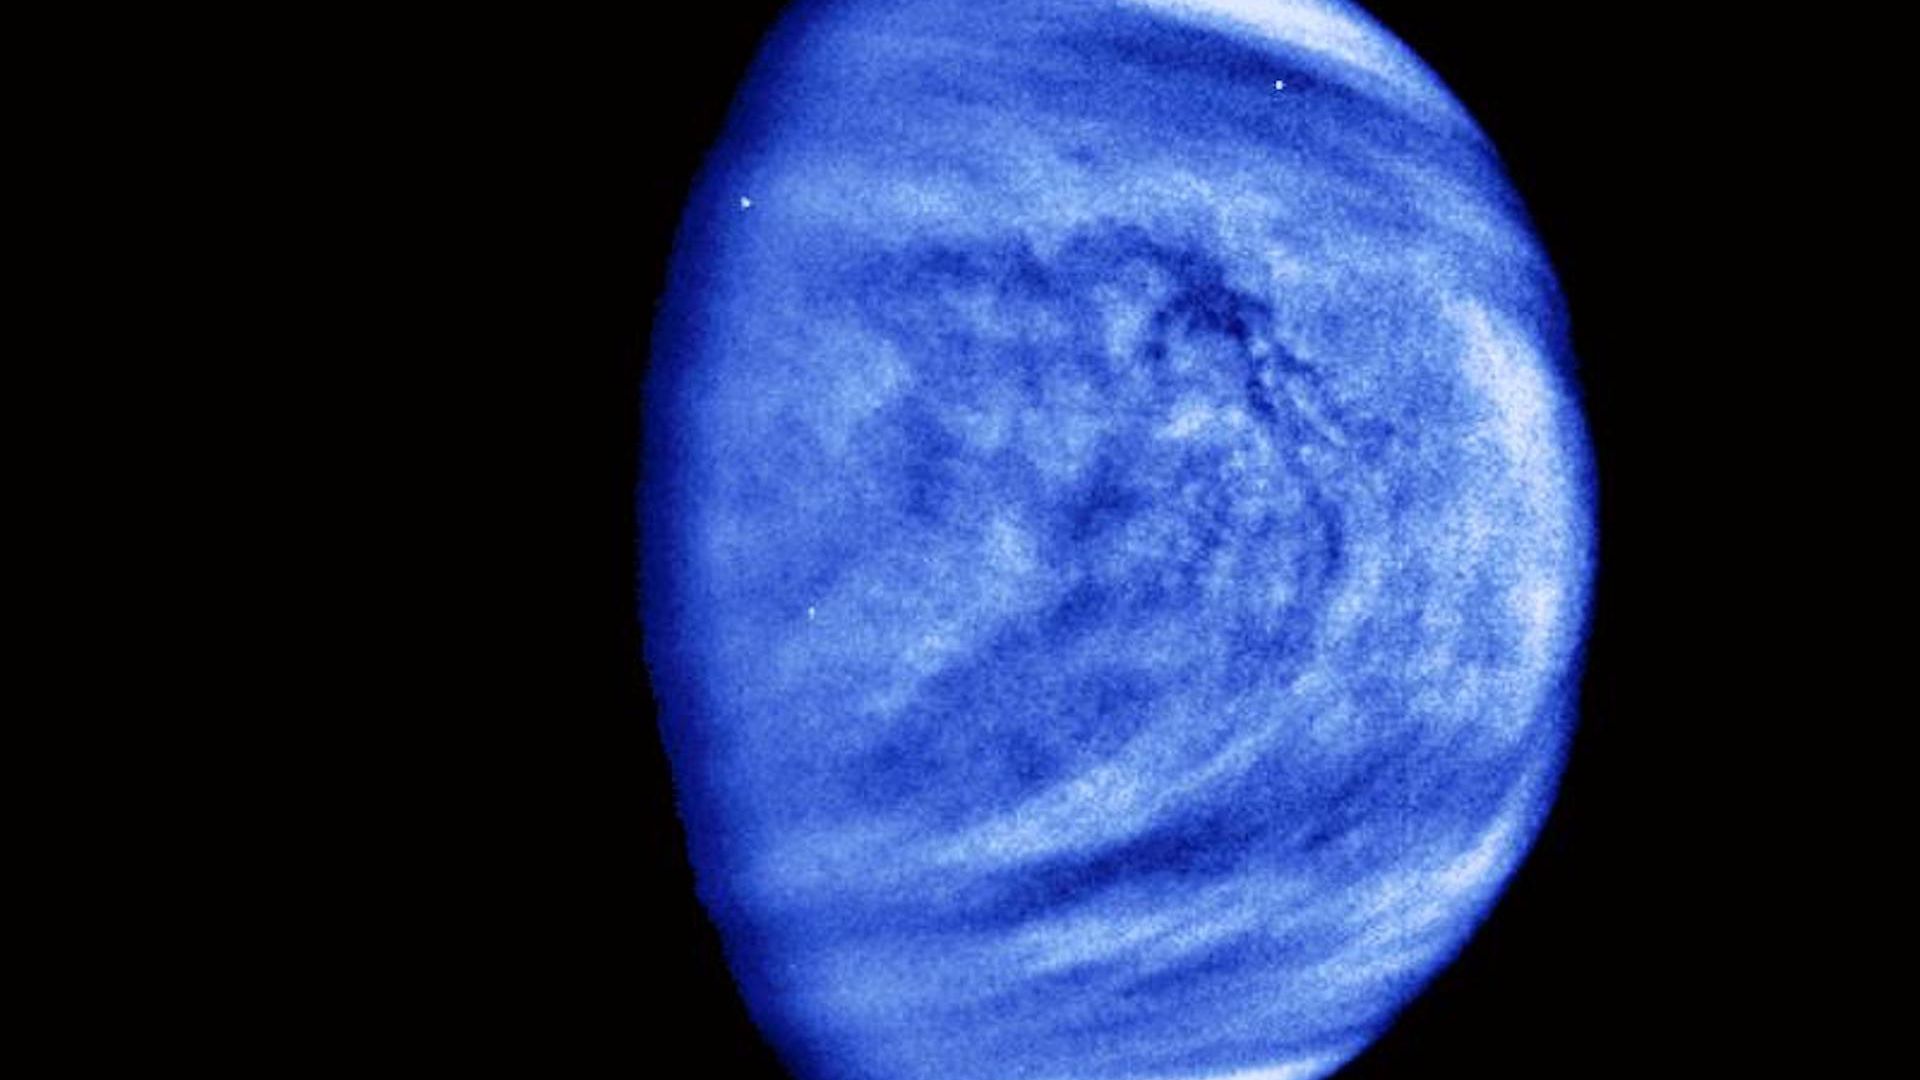 A filtered image of Venus as seen by NASA's Galileo spacecraft.